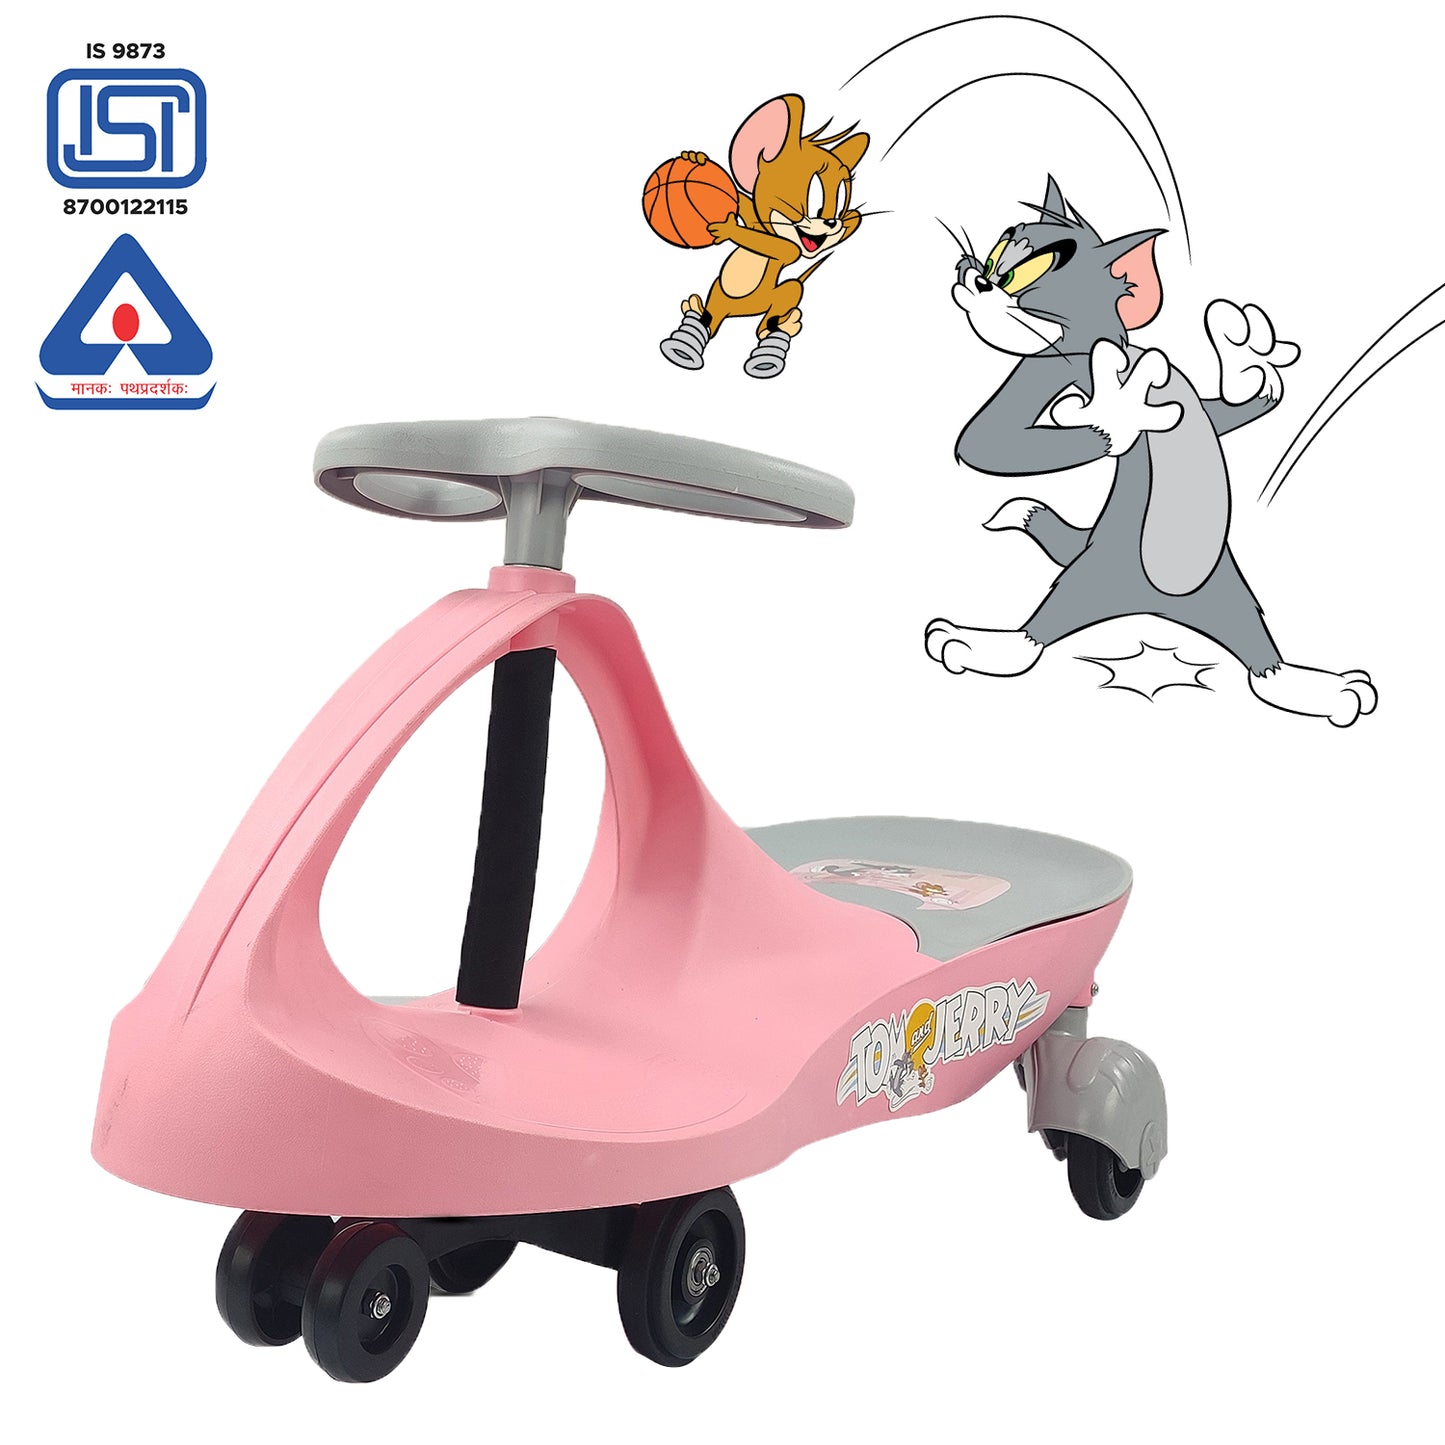 Nhr Tom & Jerry Magic Swing Car, Ride On for Kids with Scratch Free Wheels (Choose Any Color)